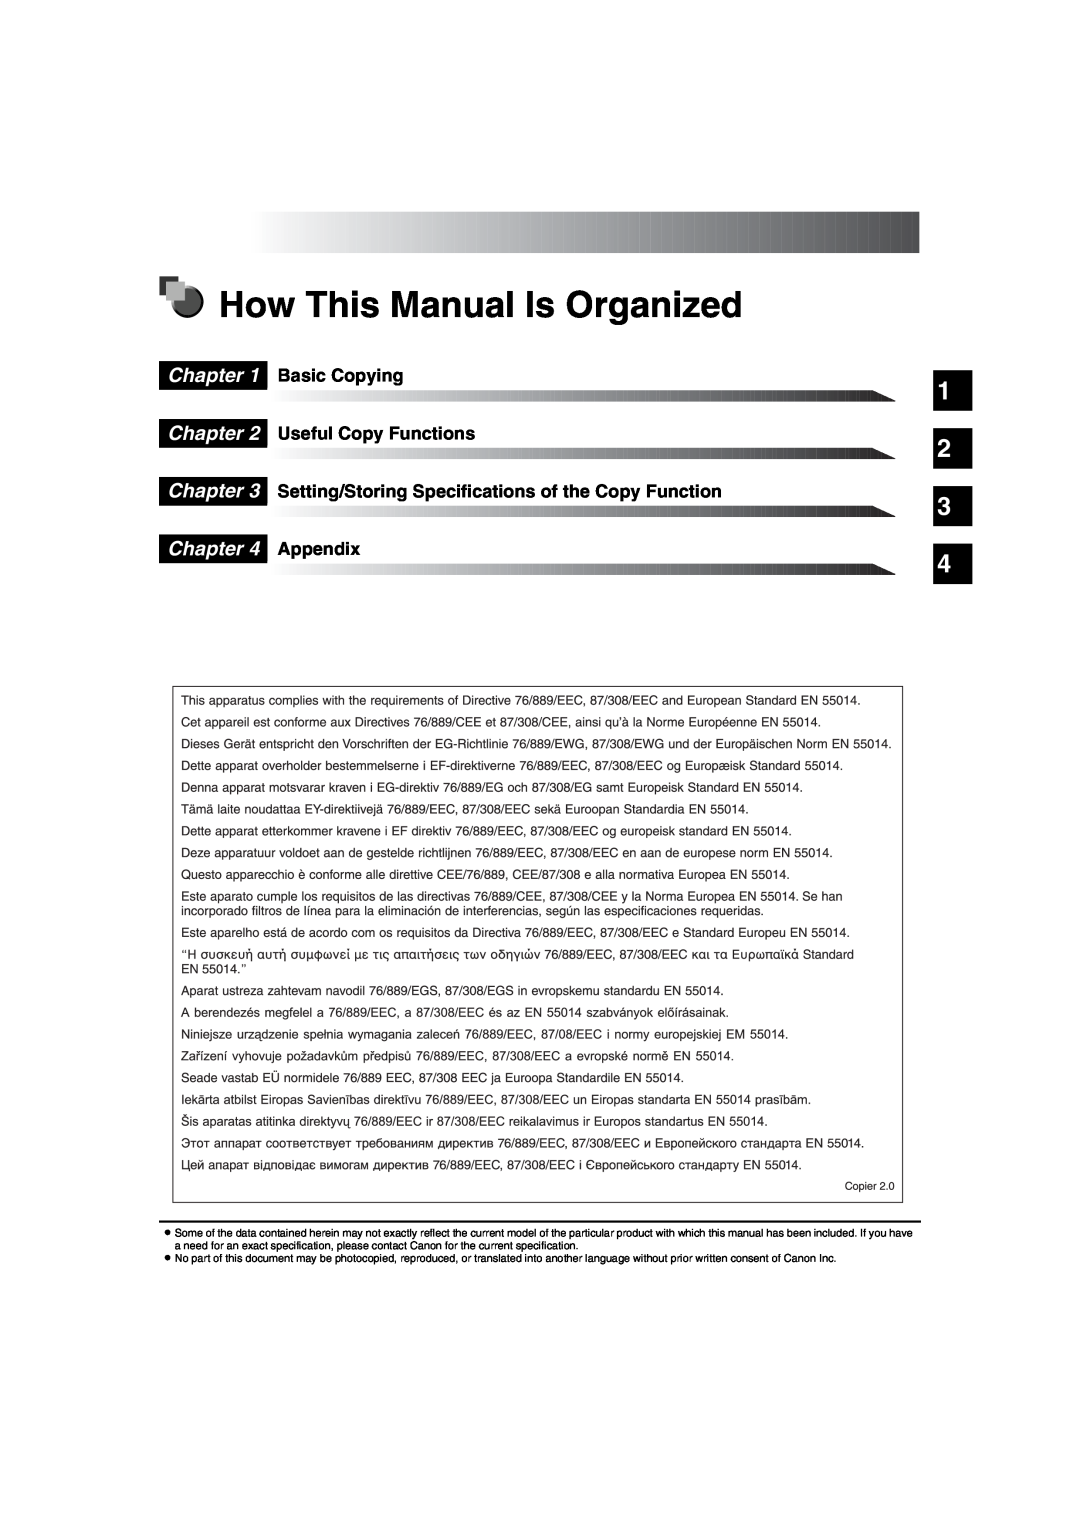 Canon IR1600 manual How This Manual Is Organized, Basic Copying Useful Copy Functions, Appendix, Chapter 